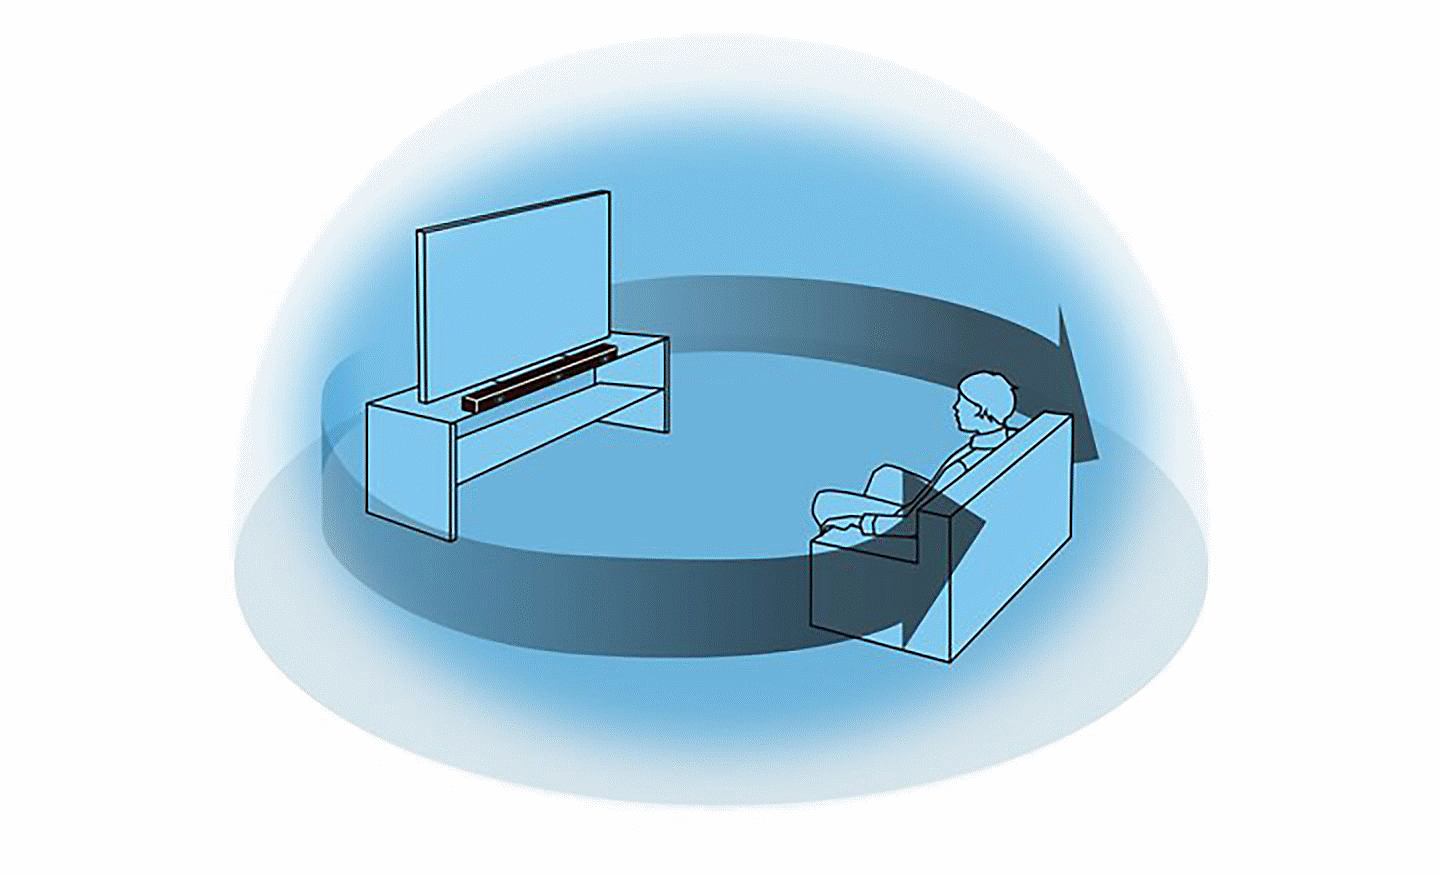 Image of a blue dome with a person siting in front of a TV and soundbar inside, two curved arrows run from the TV to the person